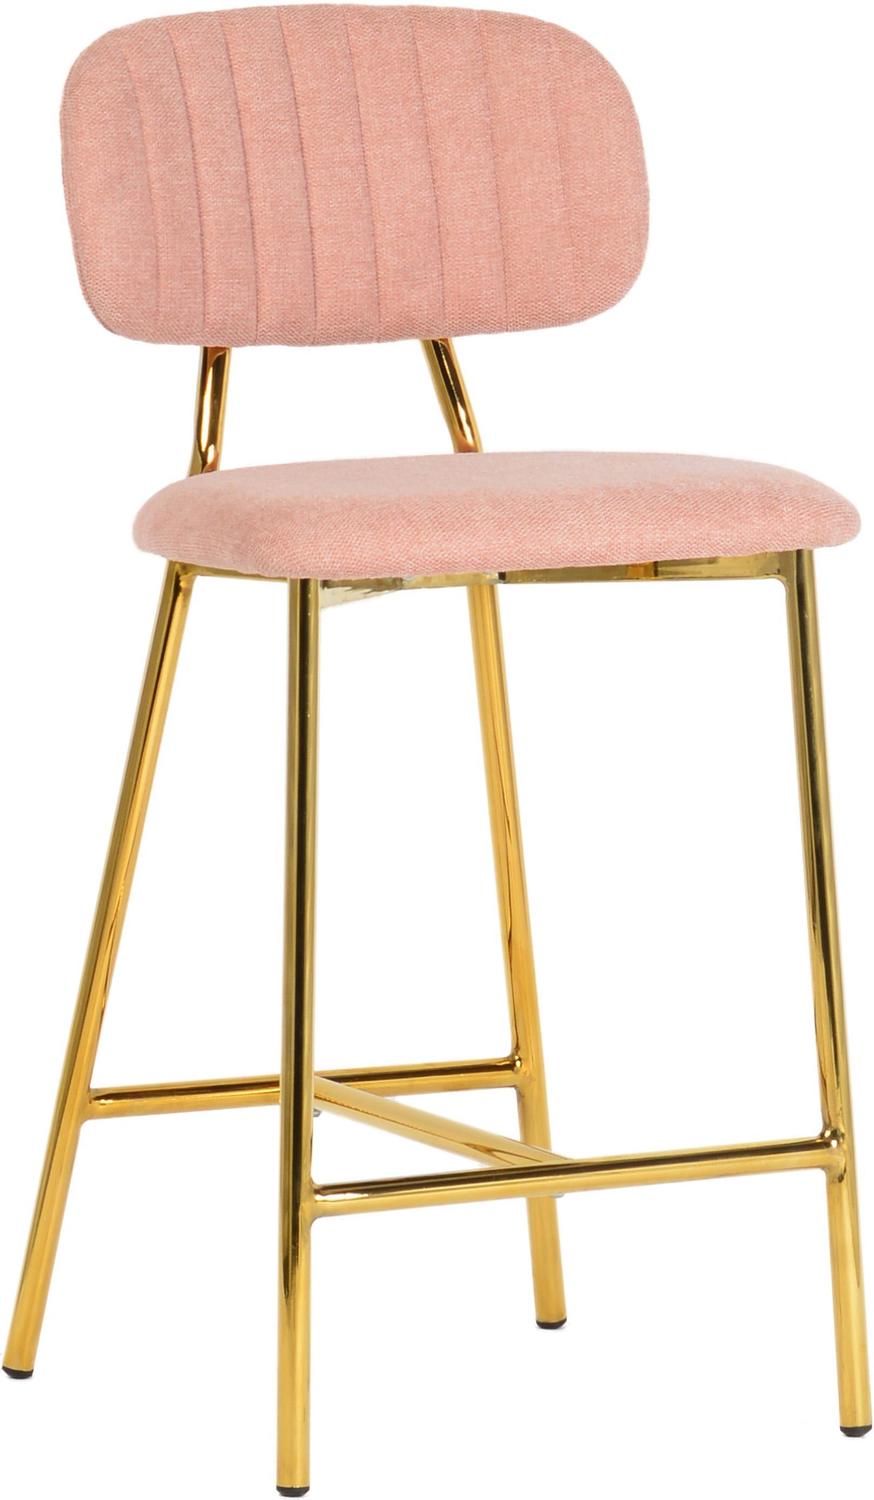 at home counter height stools Contemporary Design Furniture Stools Blush